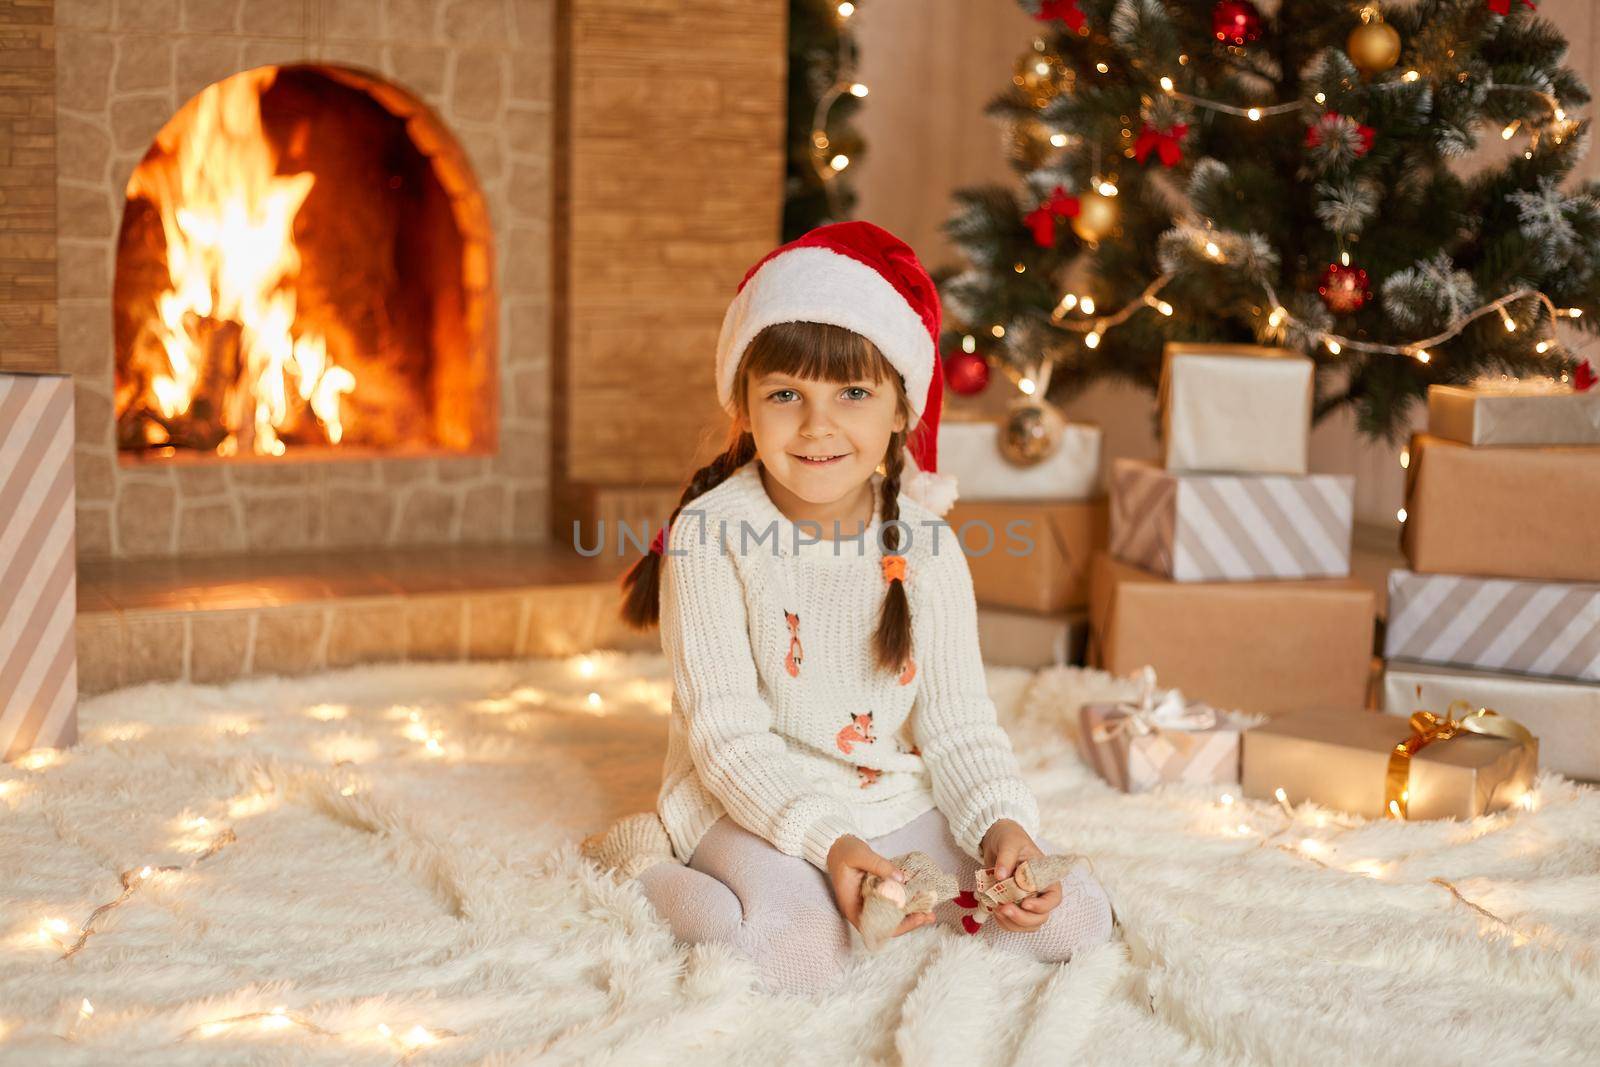 Charming kid in Santa hat and white sweater sitting on carpet near christmas tree and fireplace wit tiny toys in hands, looks smiling at camera, celebrating holiday at home.